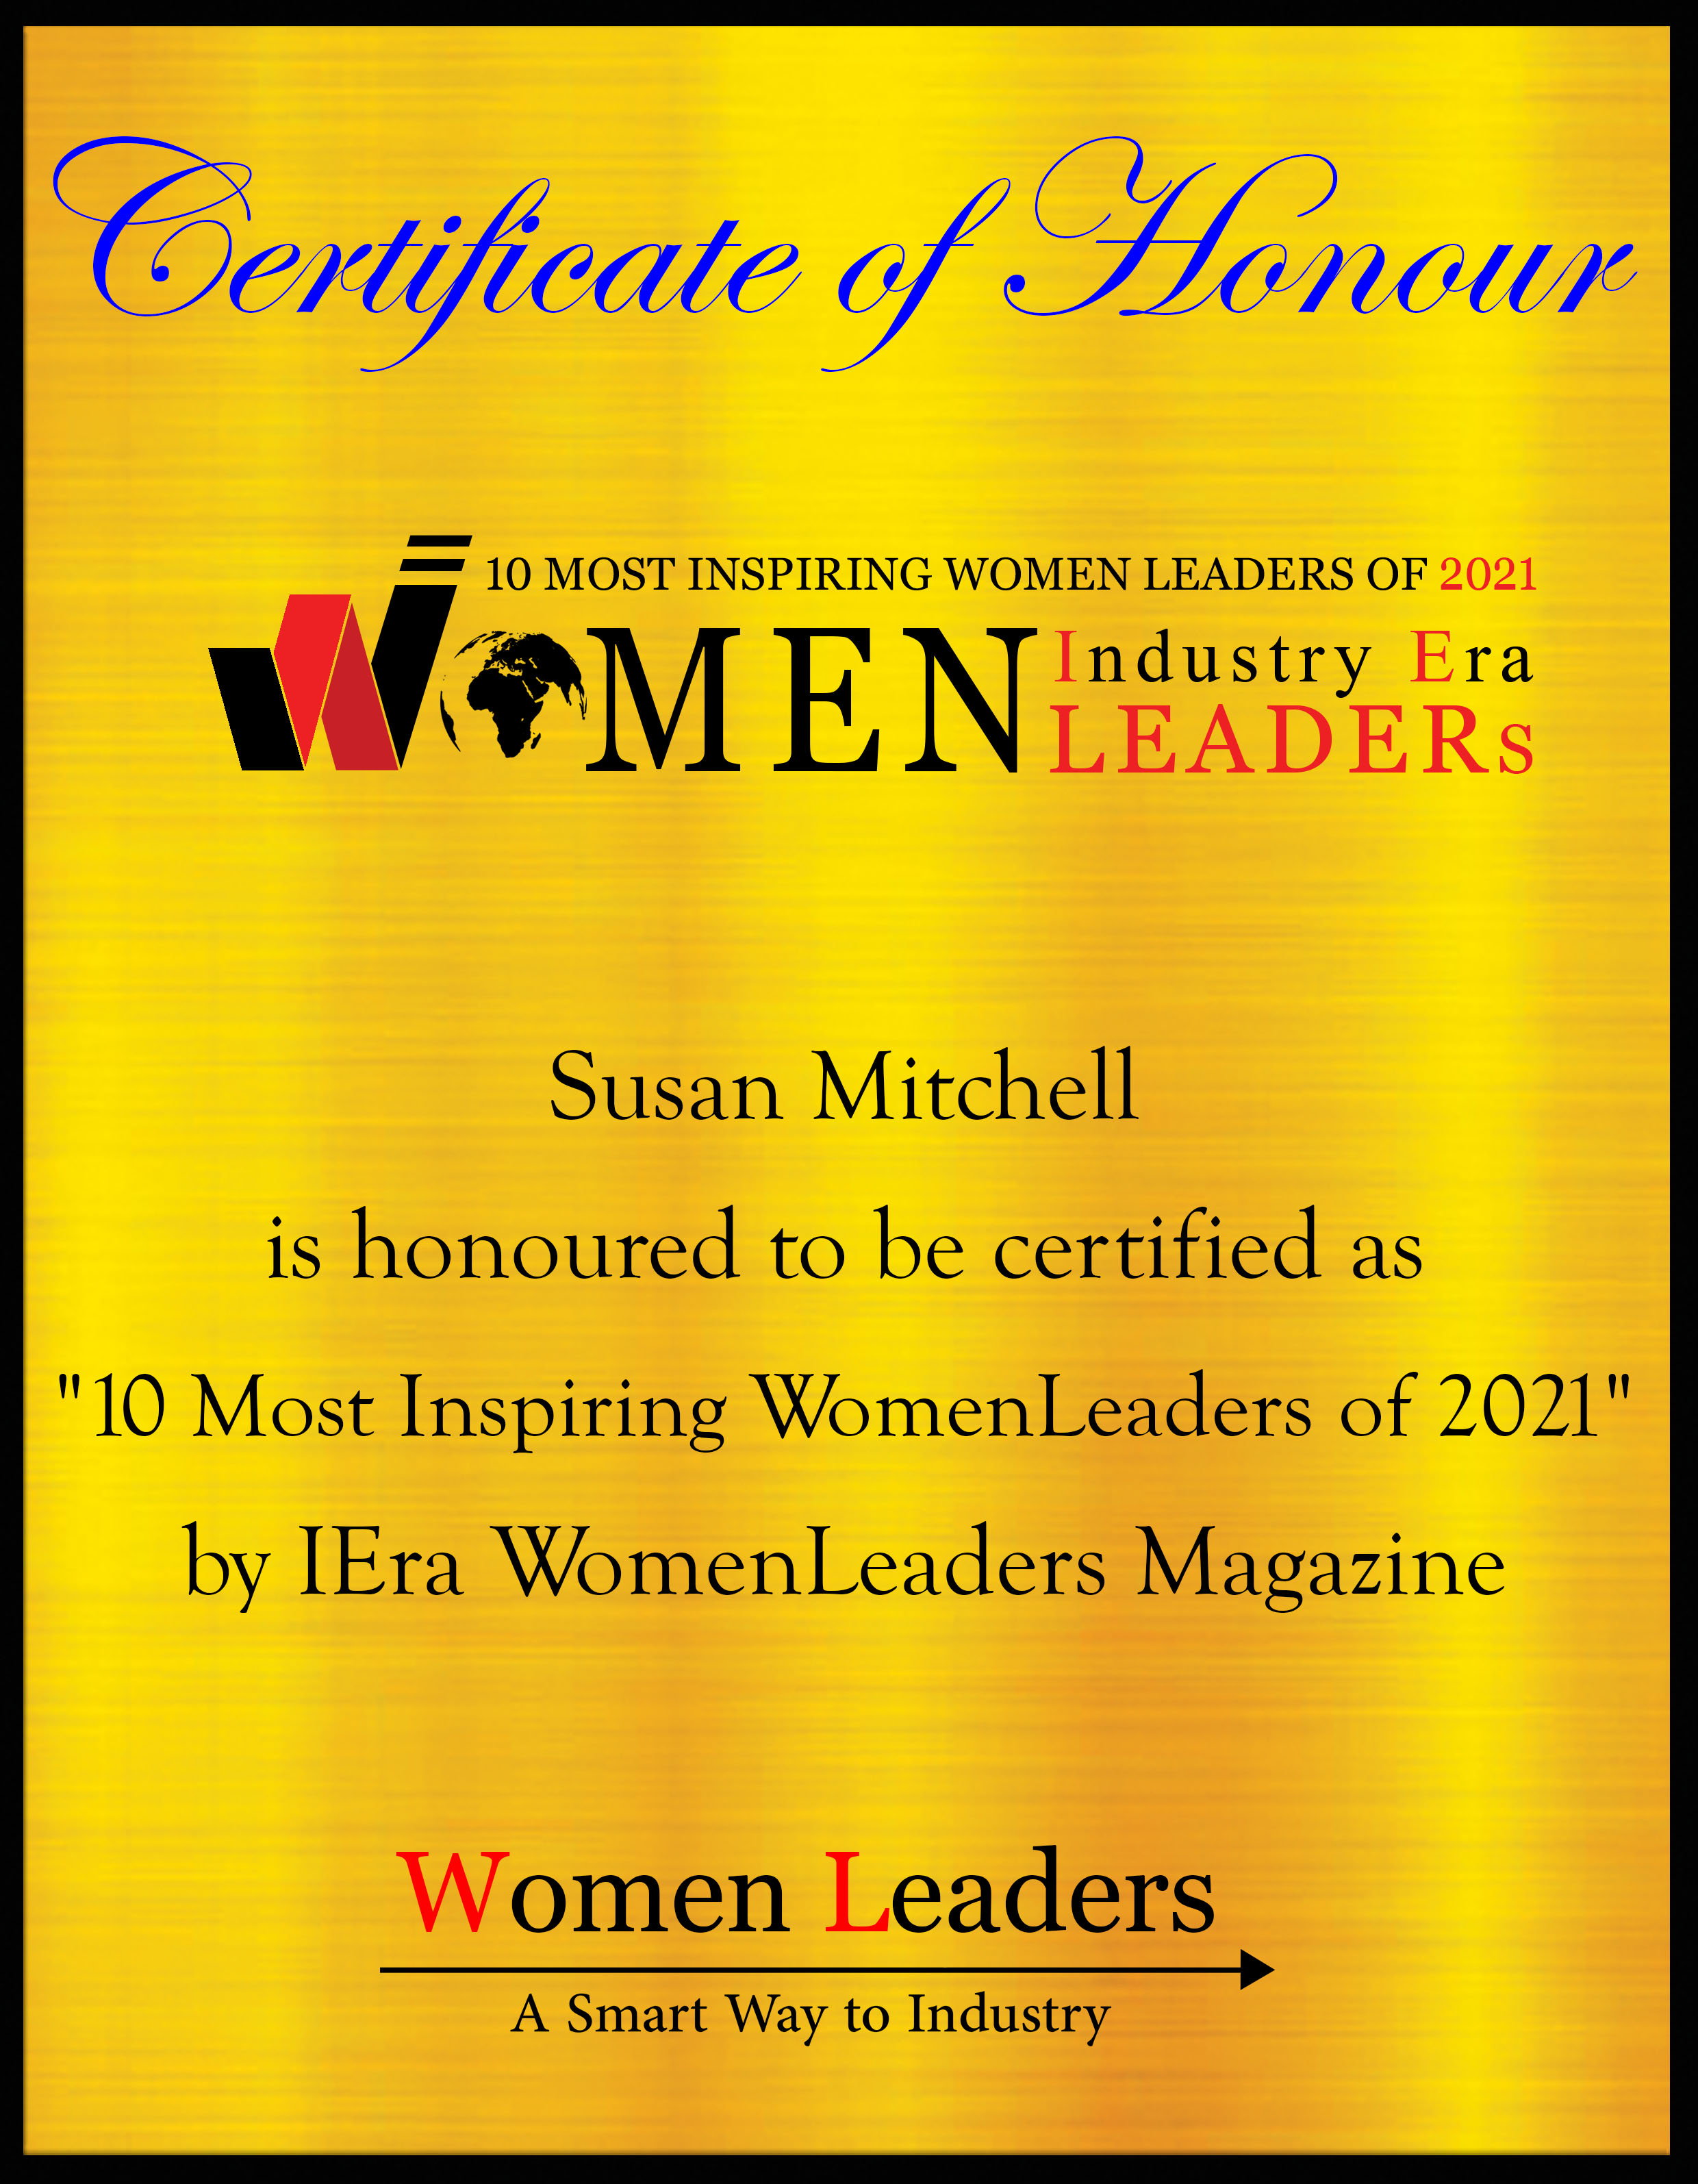 Susan Mitchell, CEO & Co Founder Mitchell, Stankovic and Associates, Most Inspiring WomenLeaders of 2021